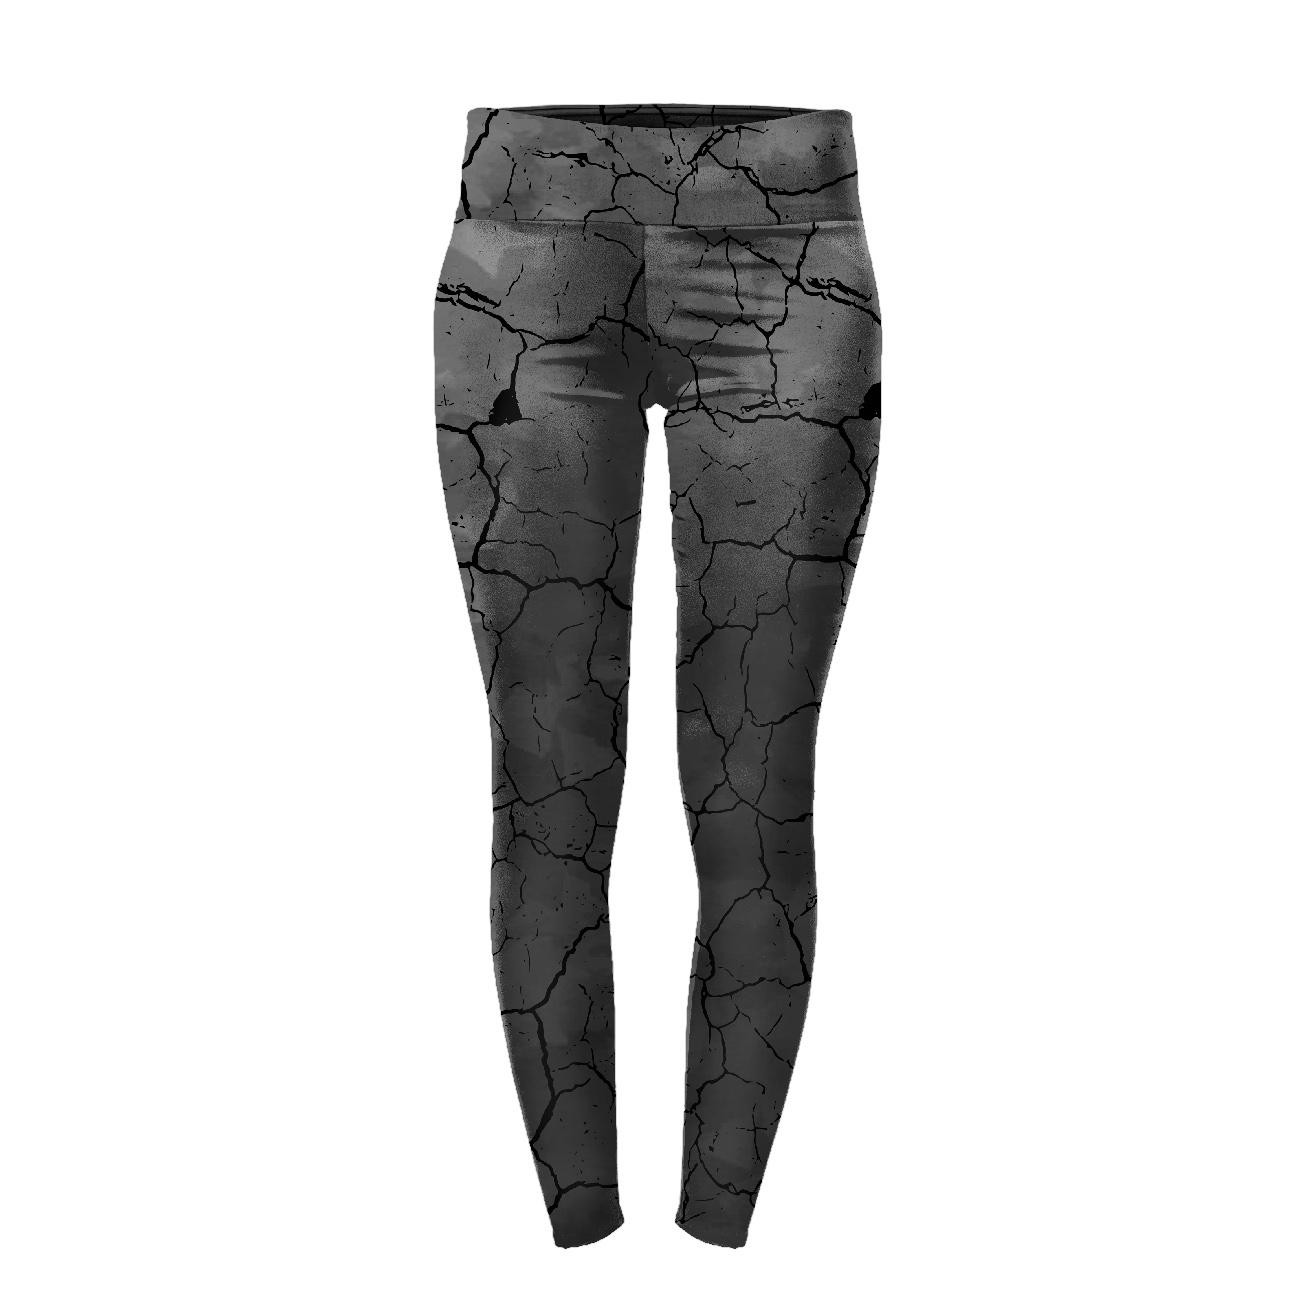 SPORTS LEGGINGS -  SCORCHED EARTH (black)